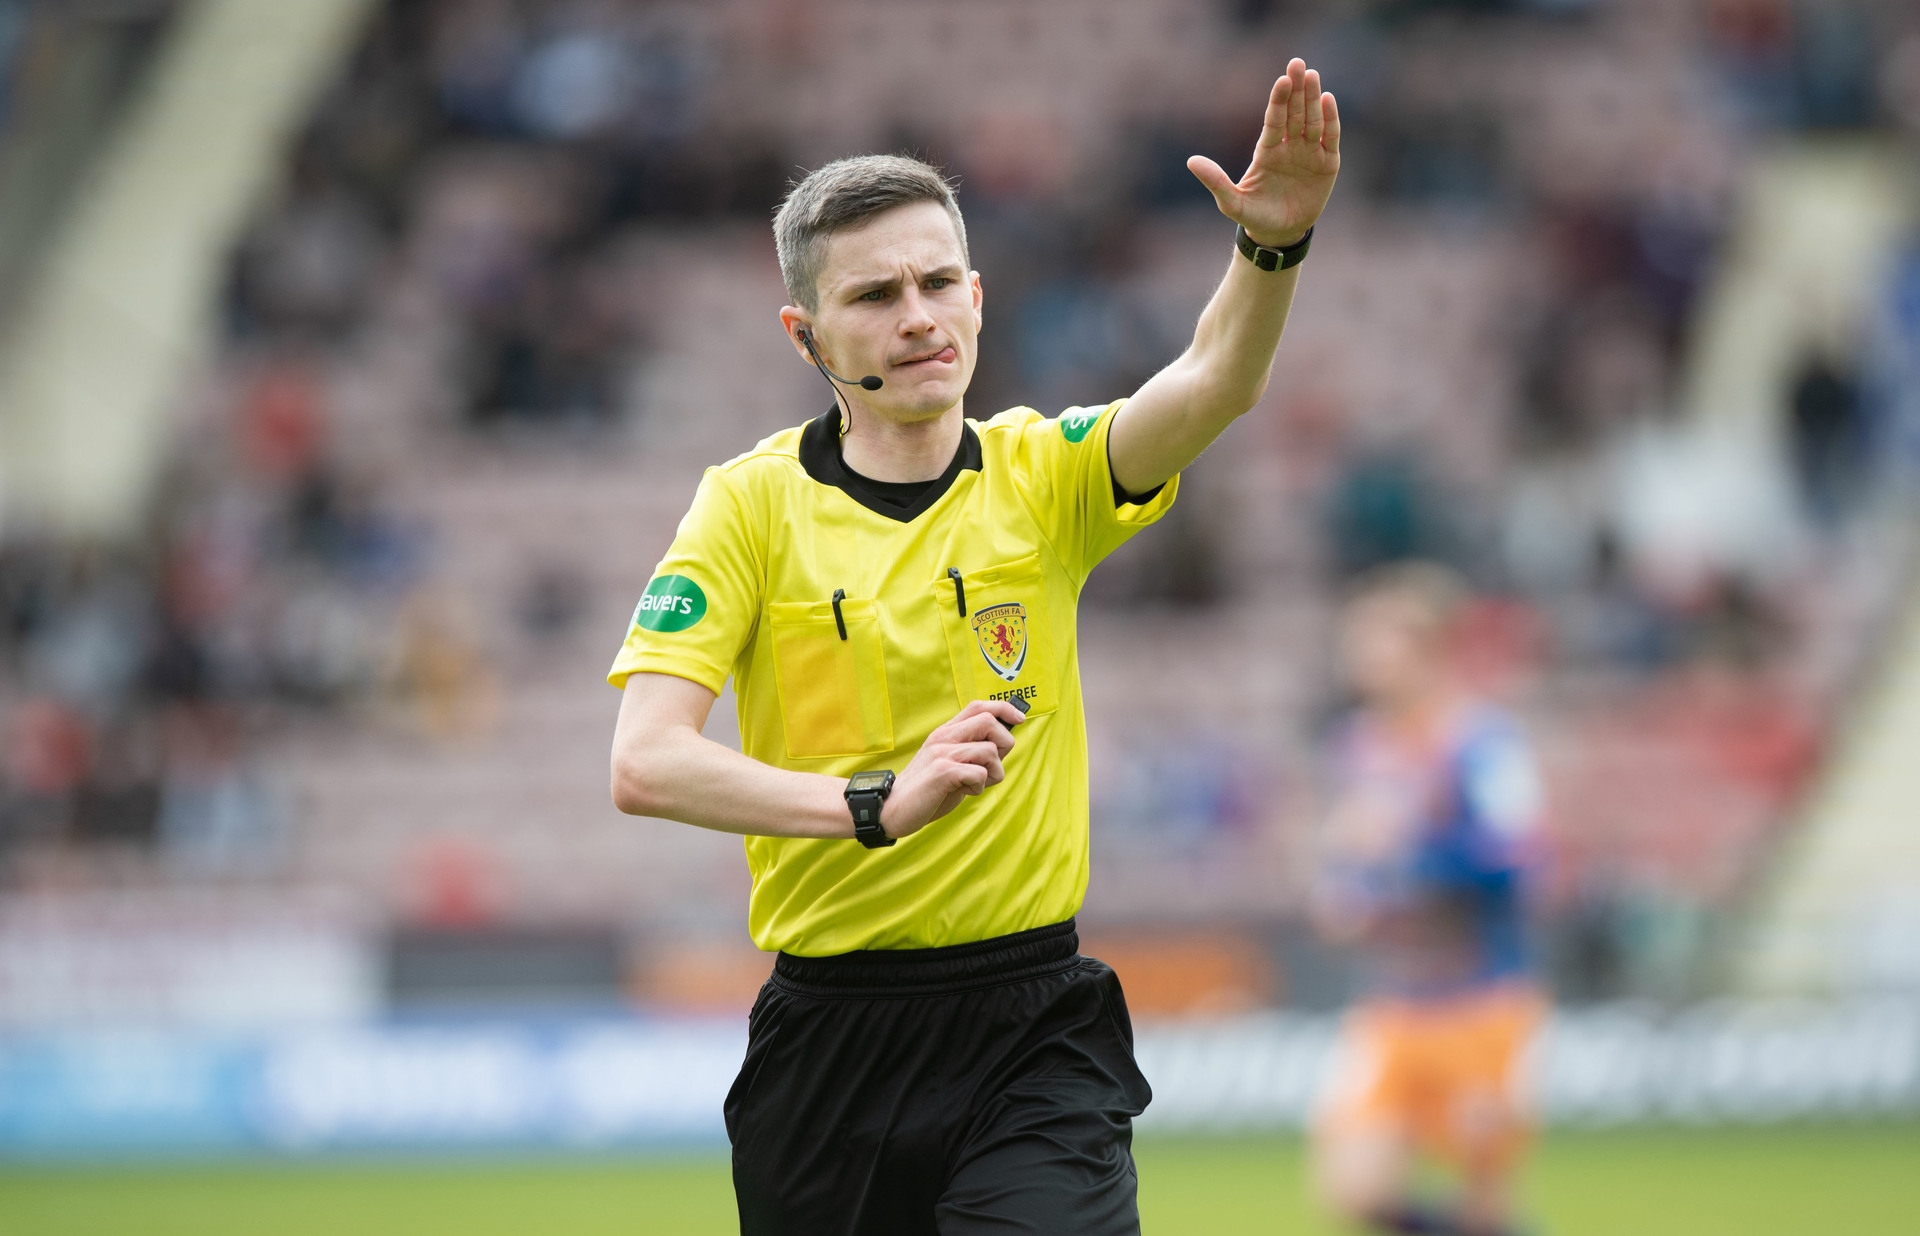 Craig Napier is one of two referees to have declared his homosexuality.